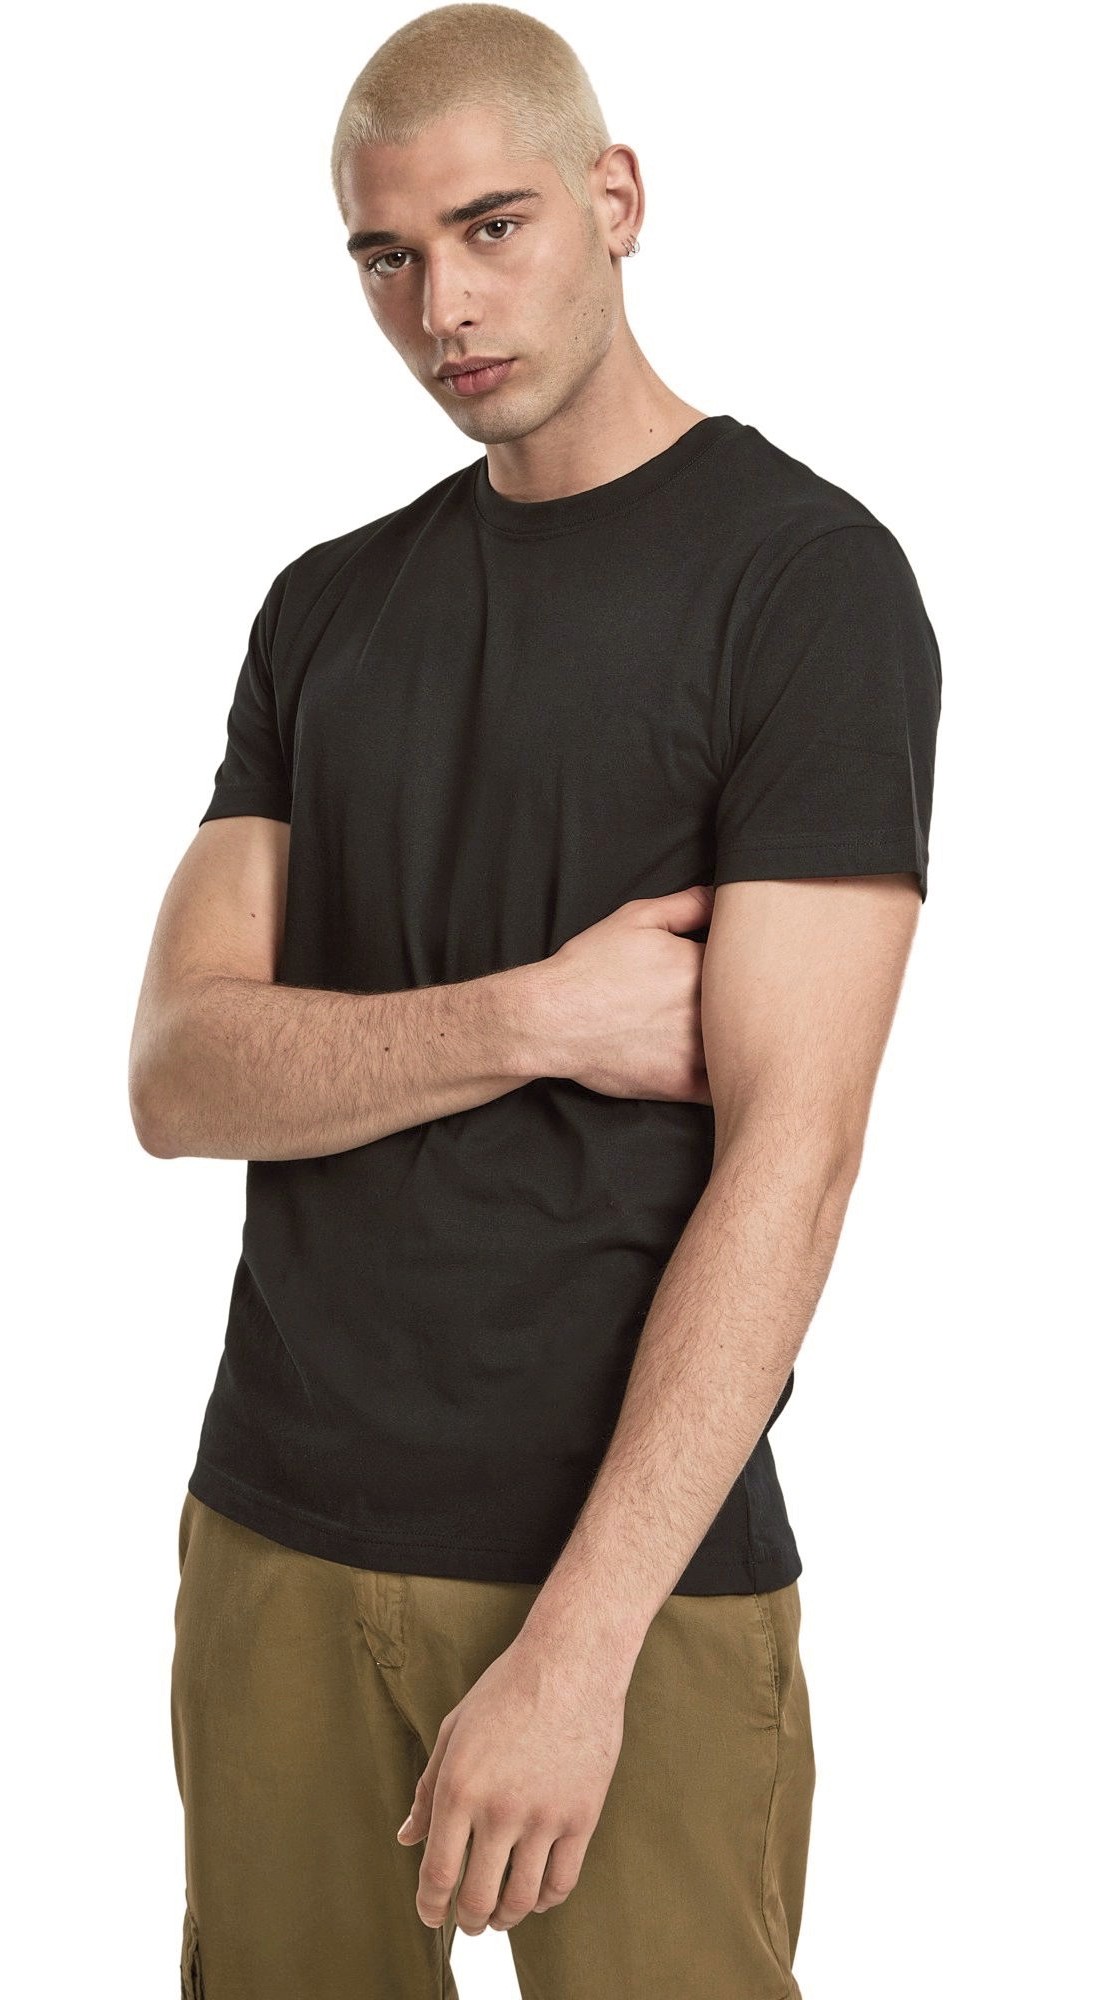 T-Shirts - Build Your Brand - Organic T-Shirt Round Neck - BY136